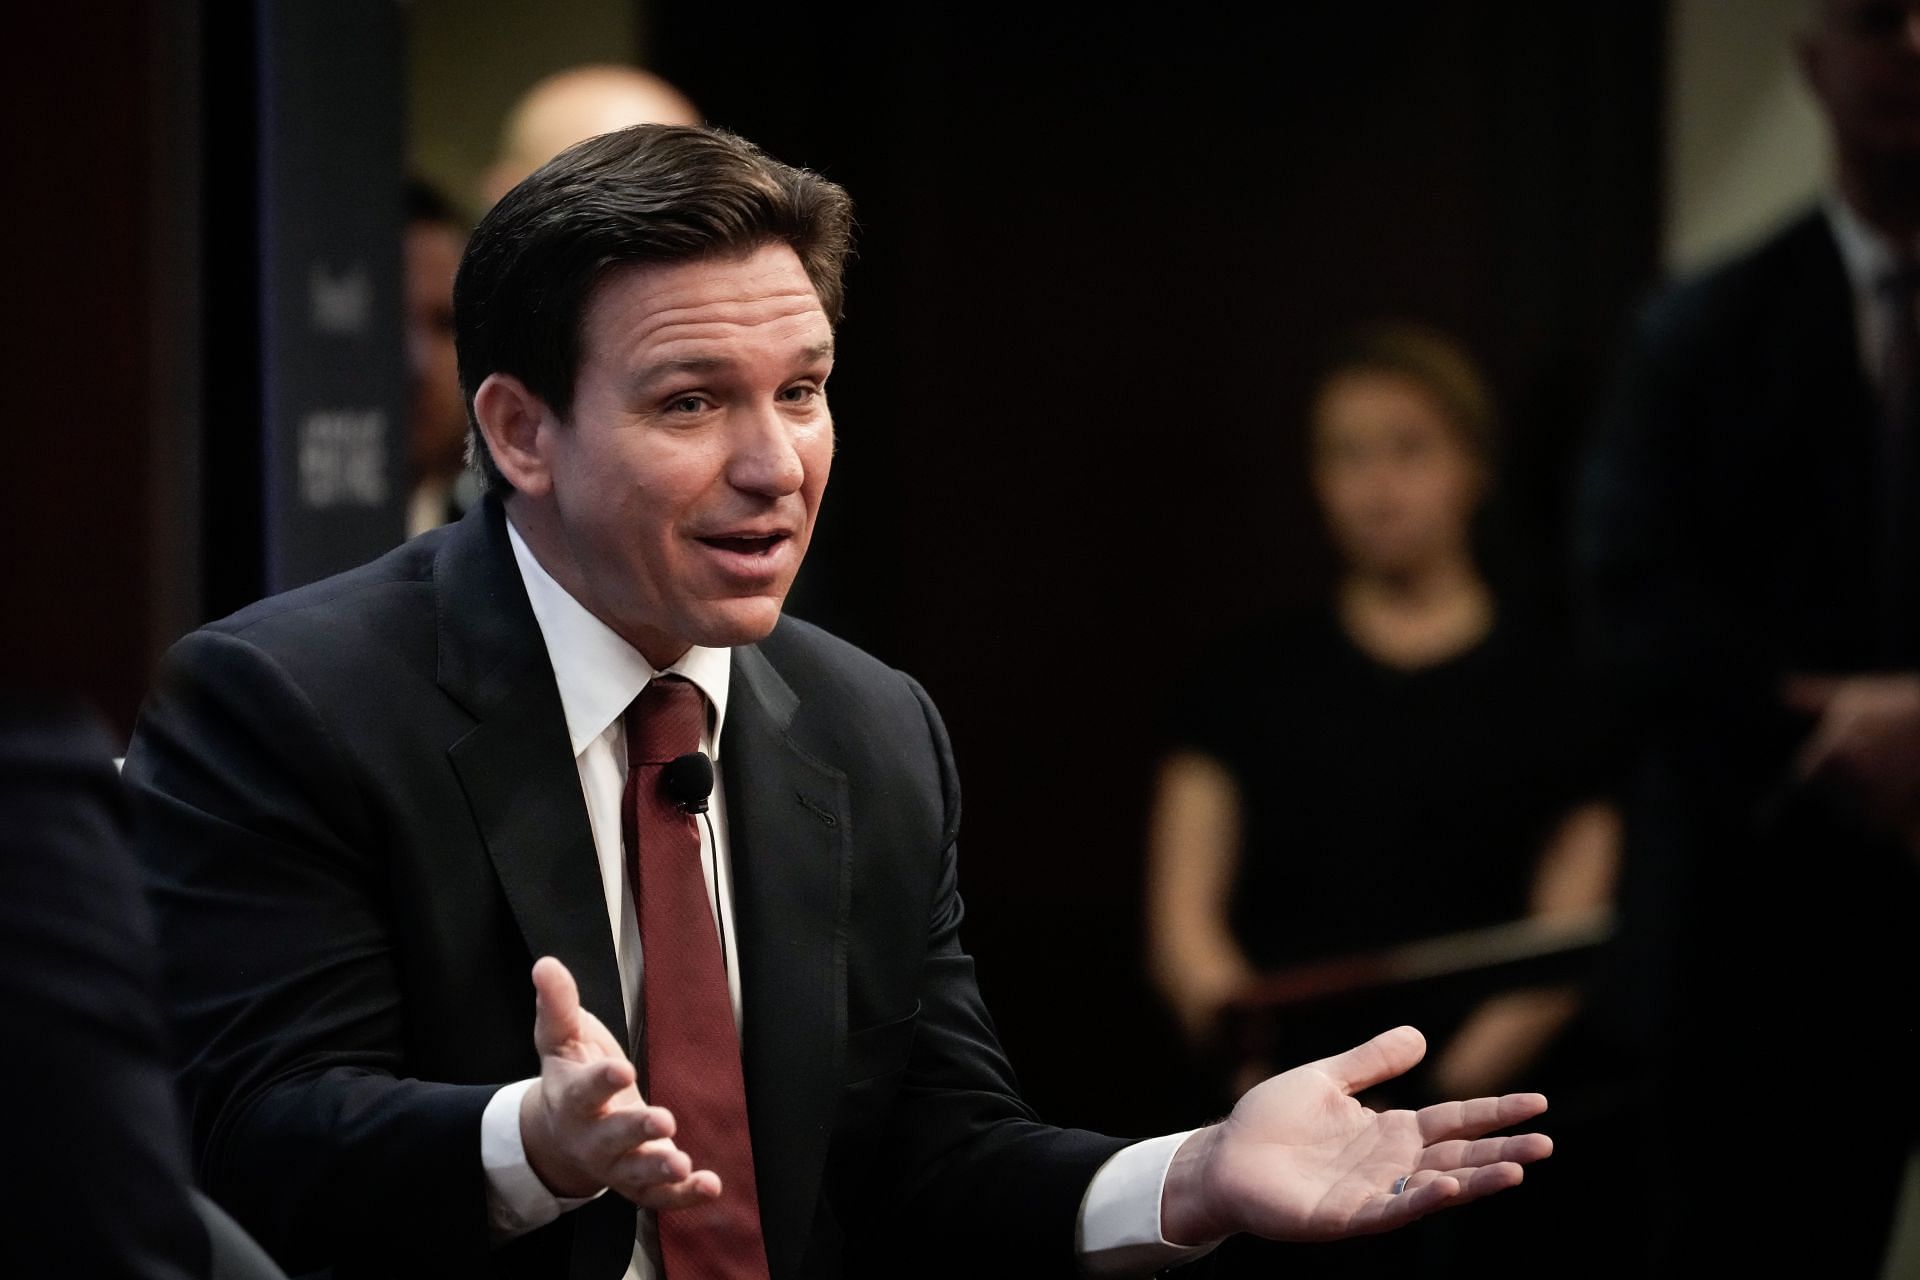 Presidential Candidate Ron DeSantis Speaks At The Heritage Foundation In Washington, D.C.